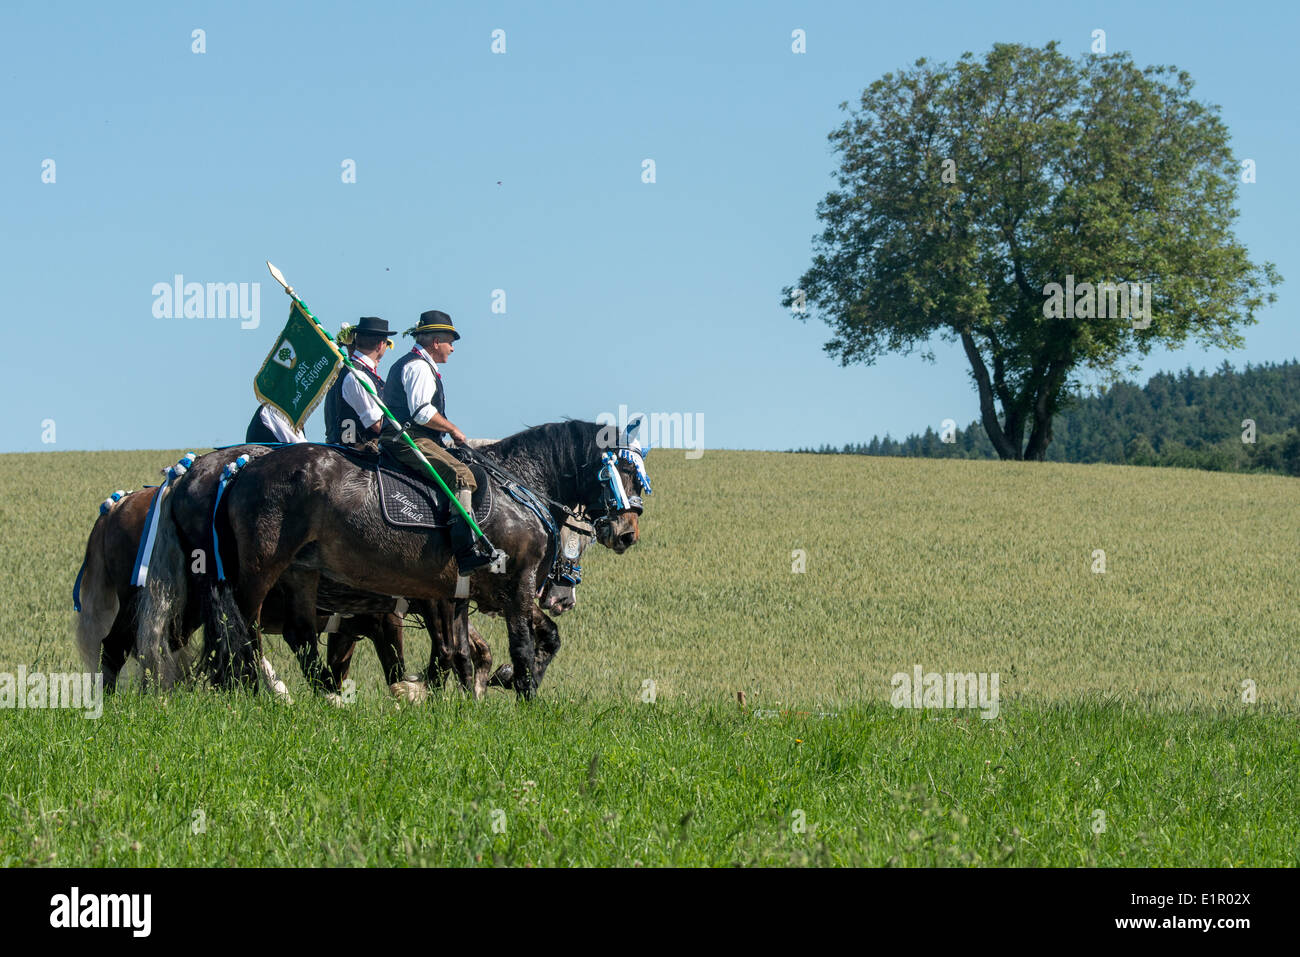 Bad Koetzting, Germany. 09th June, 2014. A group of riders and their horses participate in the Koetzting Pentecost Ride (Pfingstritt) near Bad Koetzting, Germany, 09 June 2014. The procession counts approximately 900 riders and is said to be one of the oldest Bavarian customs. The so-called 'Mannerleut' ride from Koetzting to the near-by Church of Saint Nicholas. Women are not allowed to participate in the ride. Photo: ARMIN WEIGEL/dpa/Alamy Live News Stock Photo